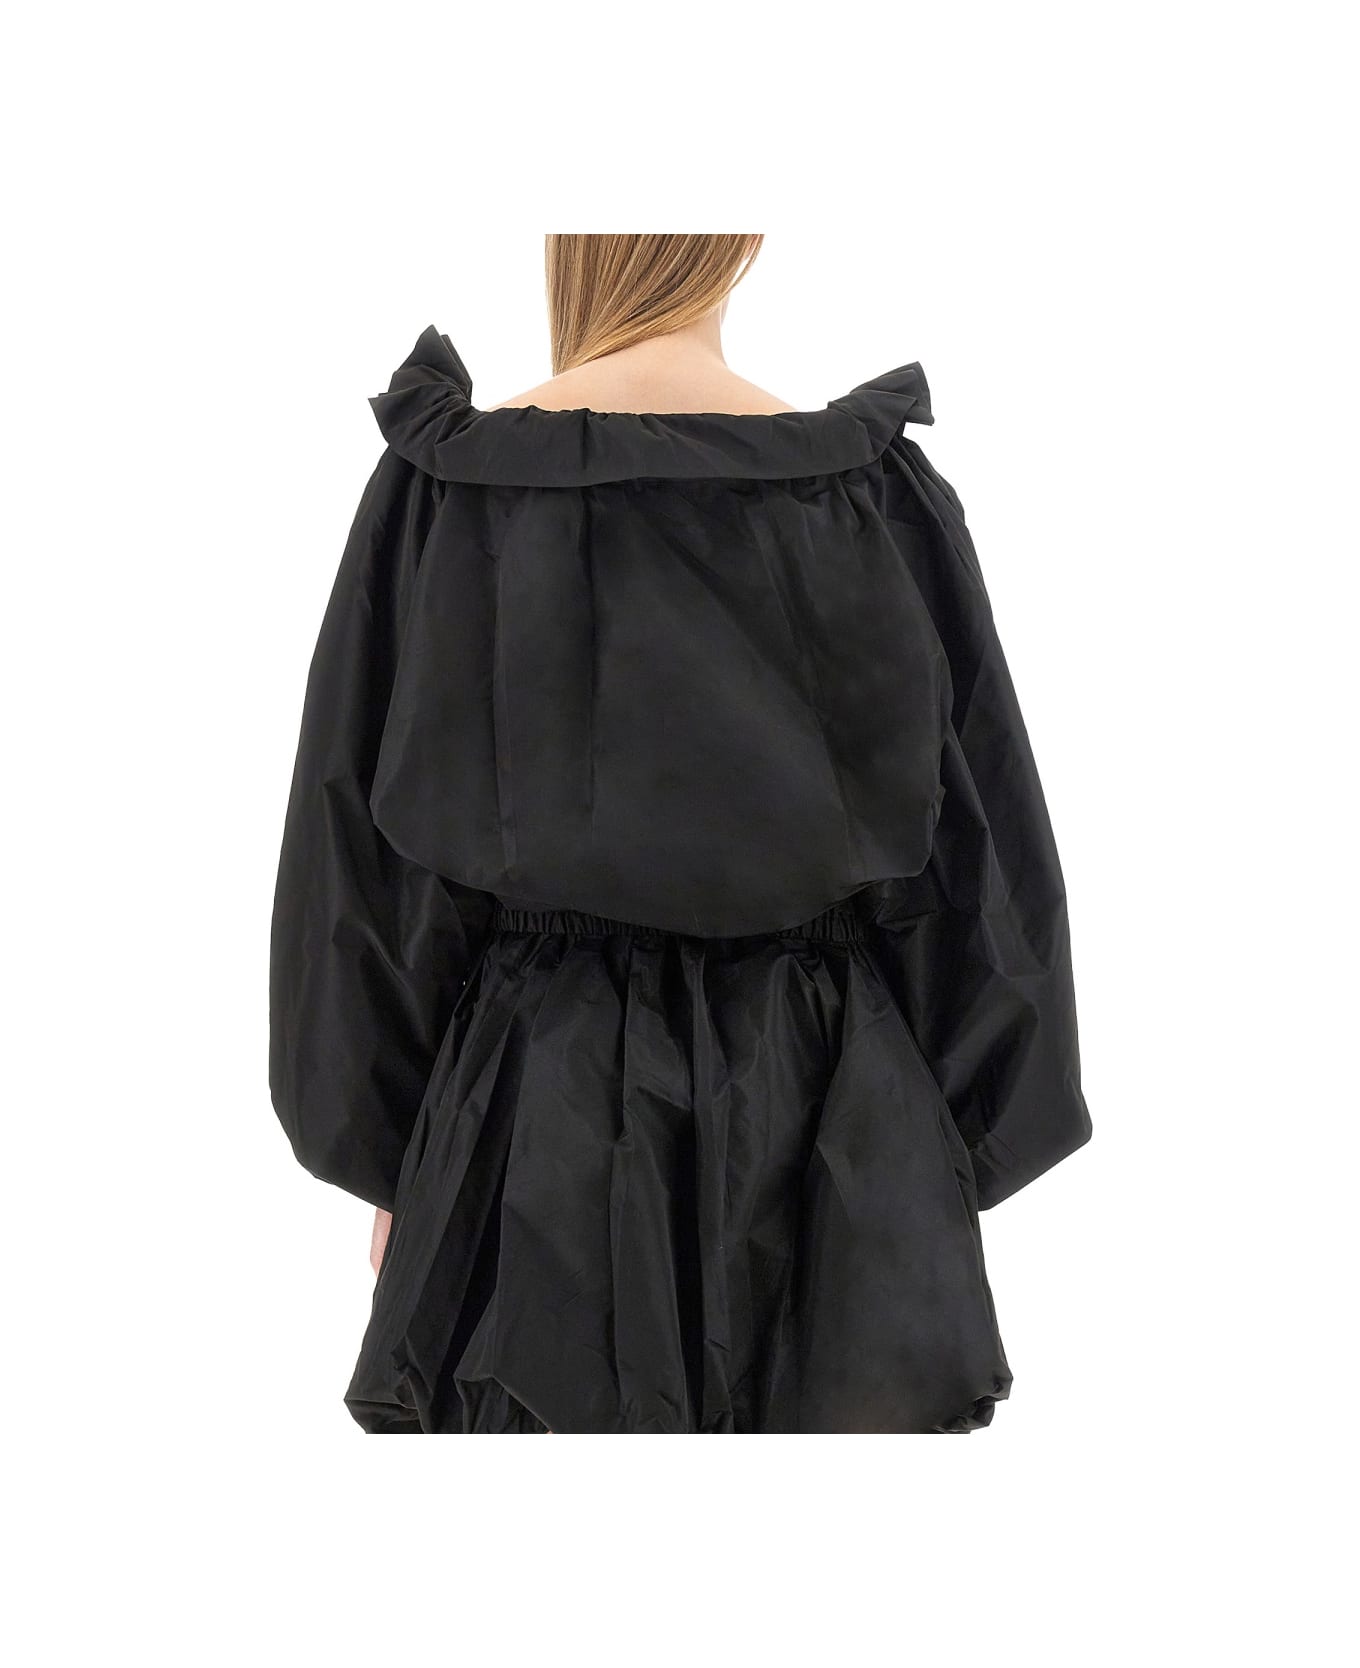 Patou Top With Balloon Sleeves - BLACK